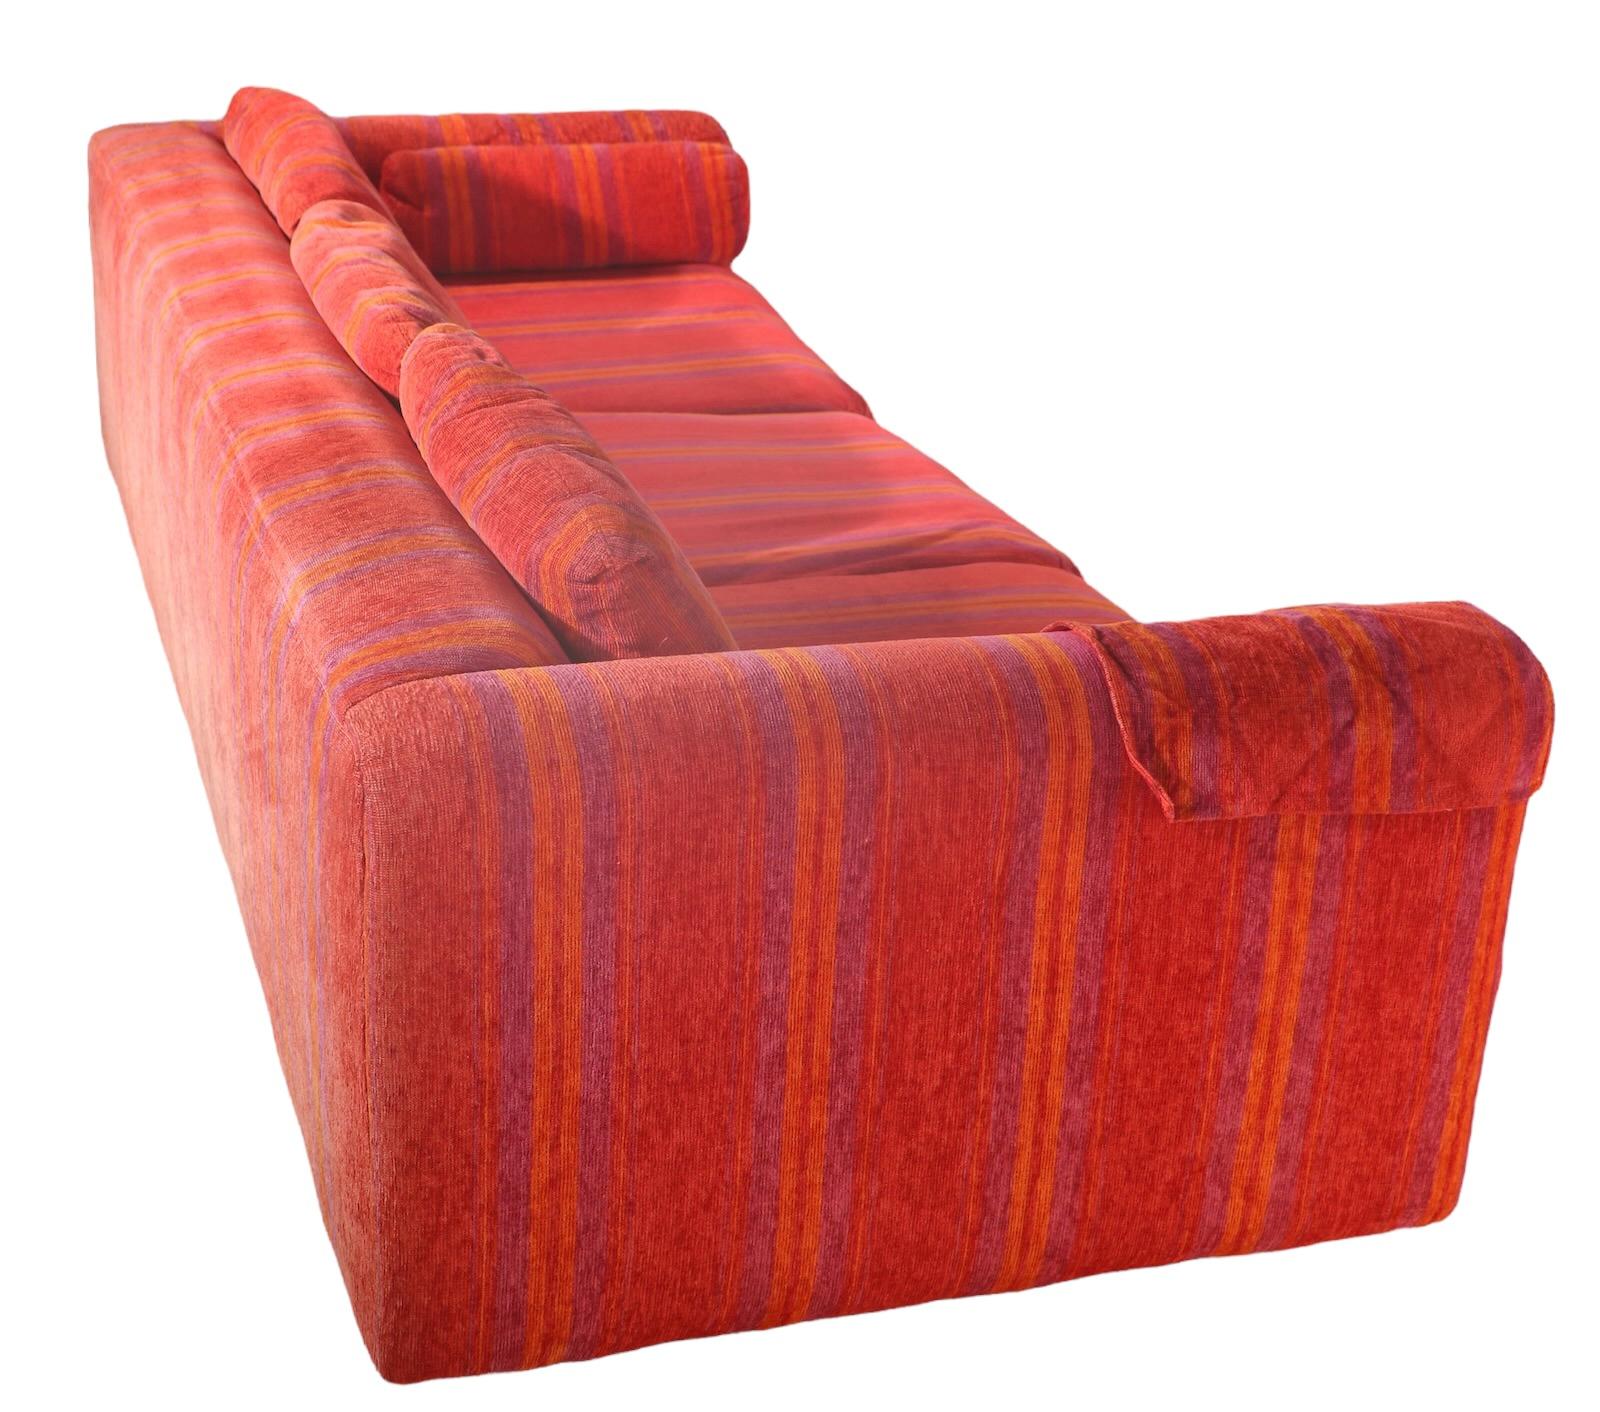 20th Century Postmodern Selig Imperial Sofa Possibly by Milo Baughman  For Sale